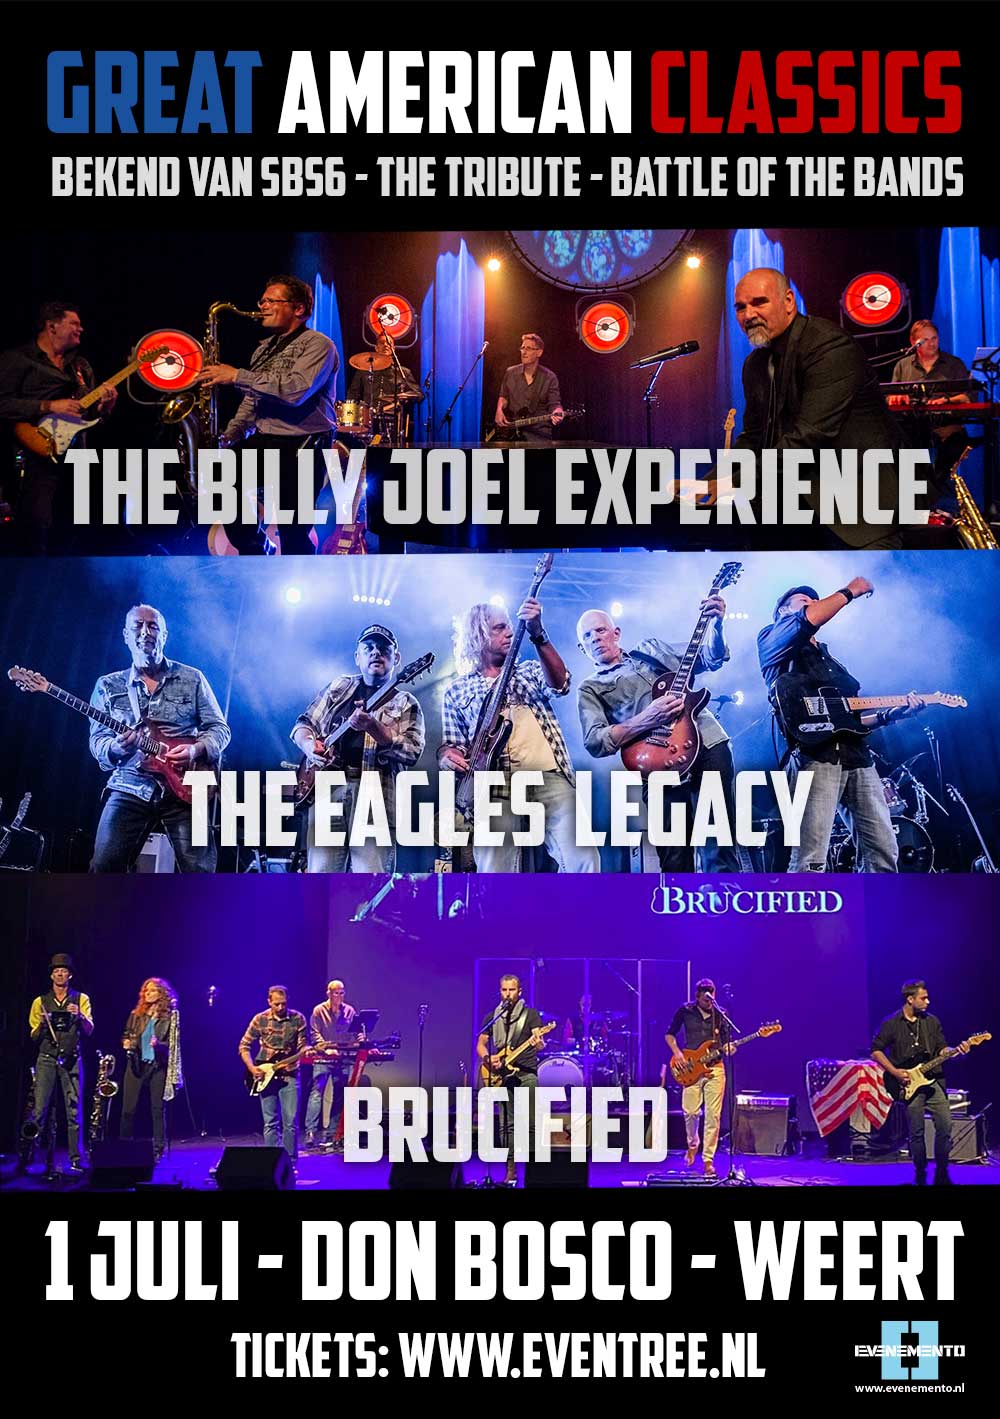 Bekend van SBS6 The Tribute | Battle of The Bands |  Great American Classics (The Billy Joel Experience, The Eagles Legacy, Brucified)